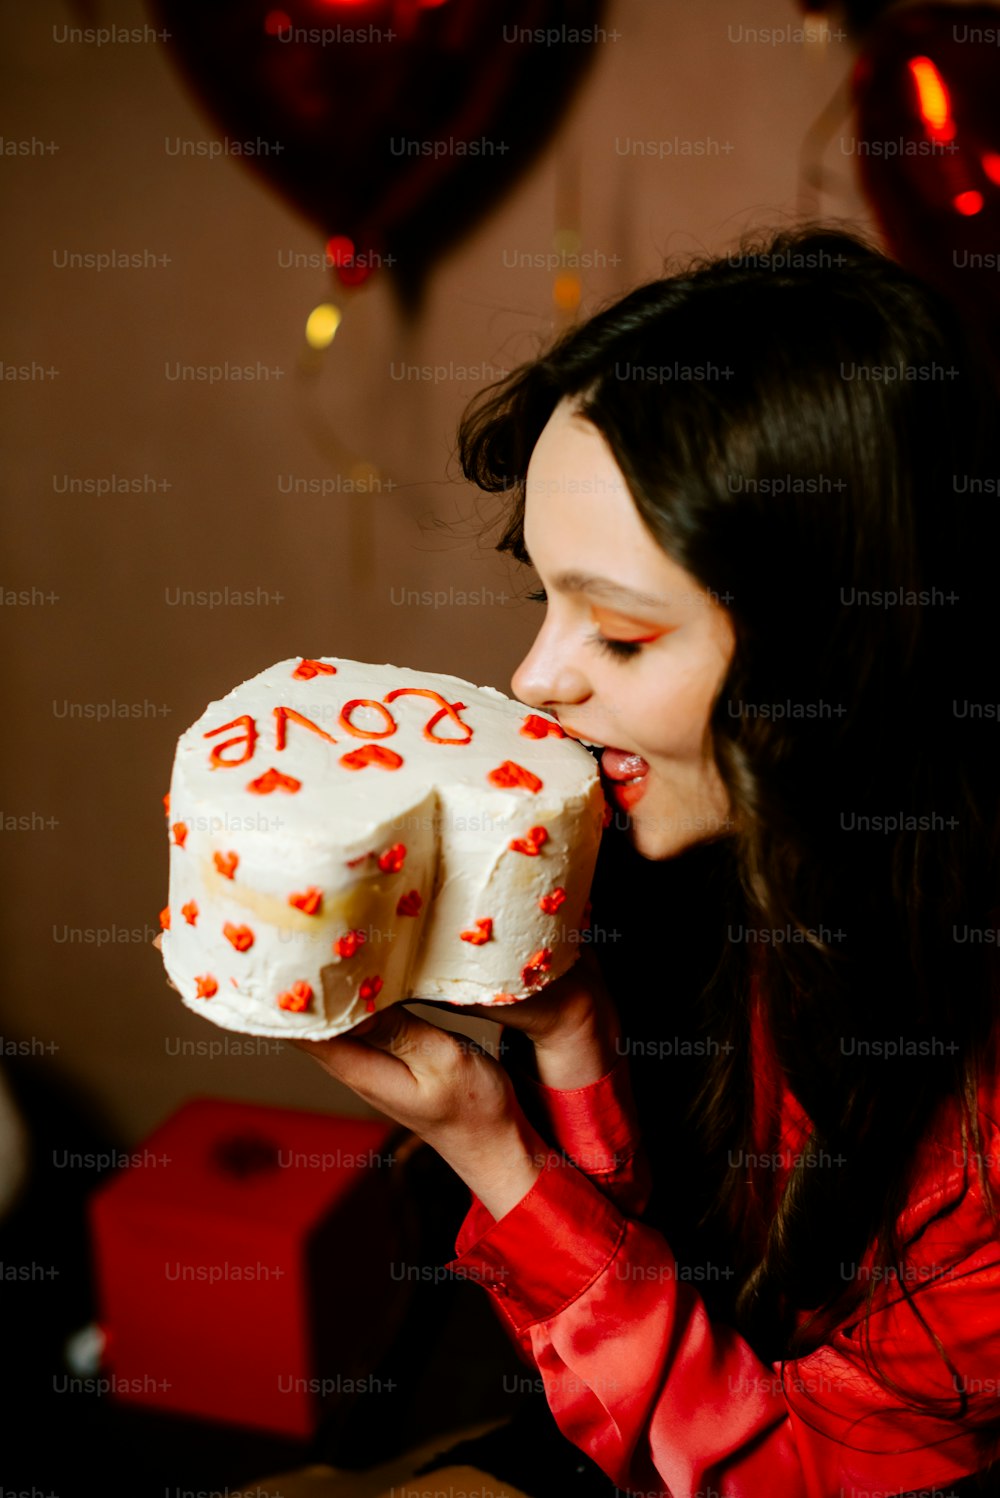 a woman biting into a cake with hearts on it